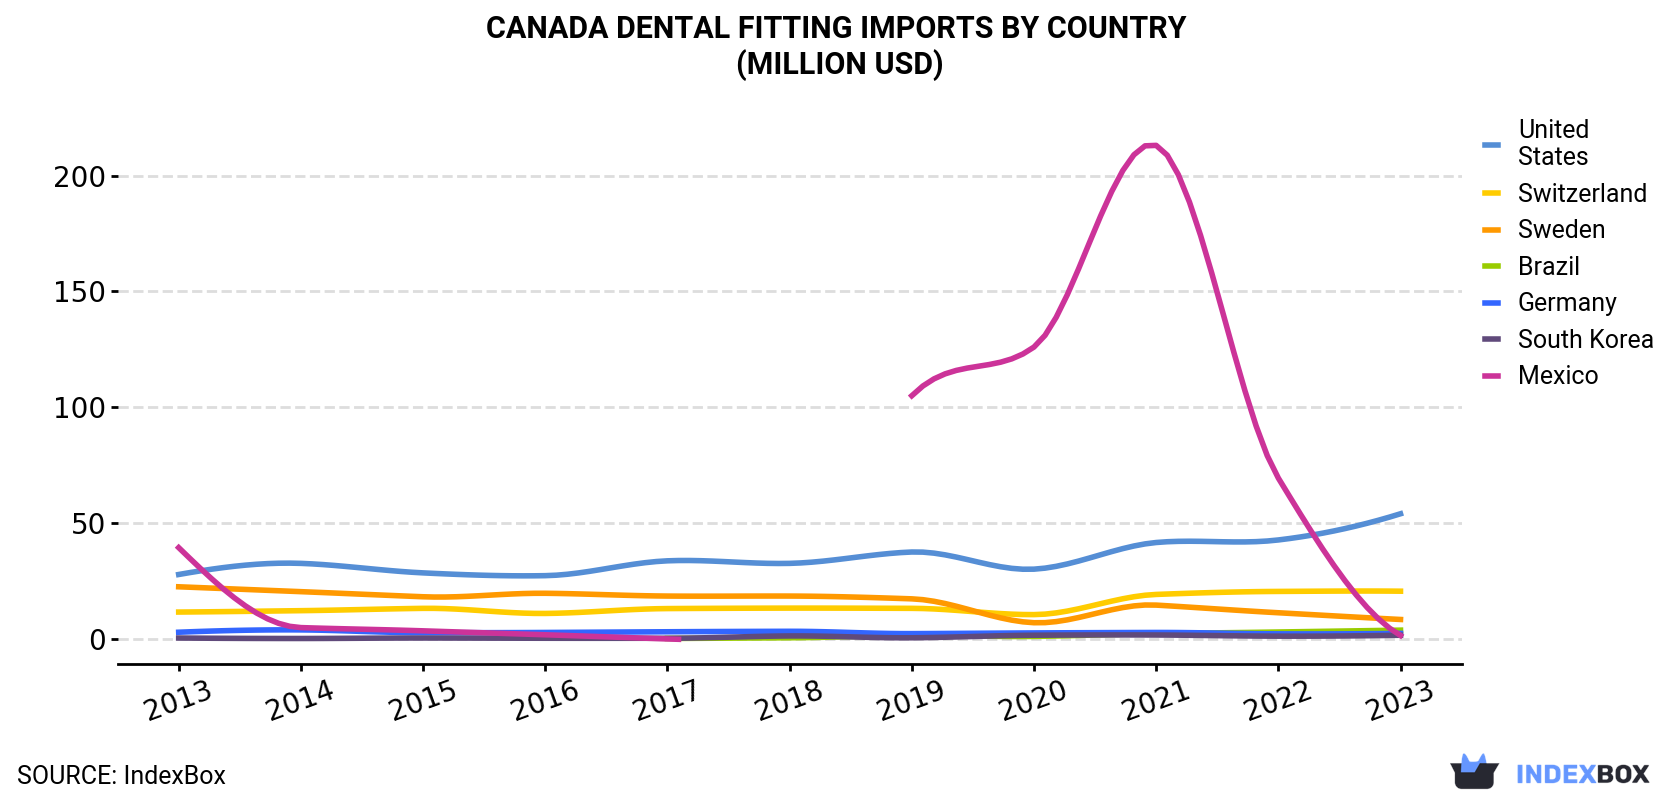 Canada Dental Fitting Imports By Country (Million USD)